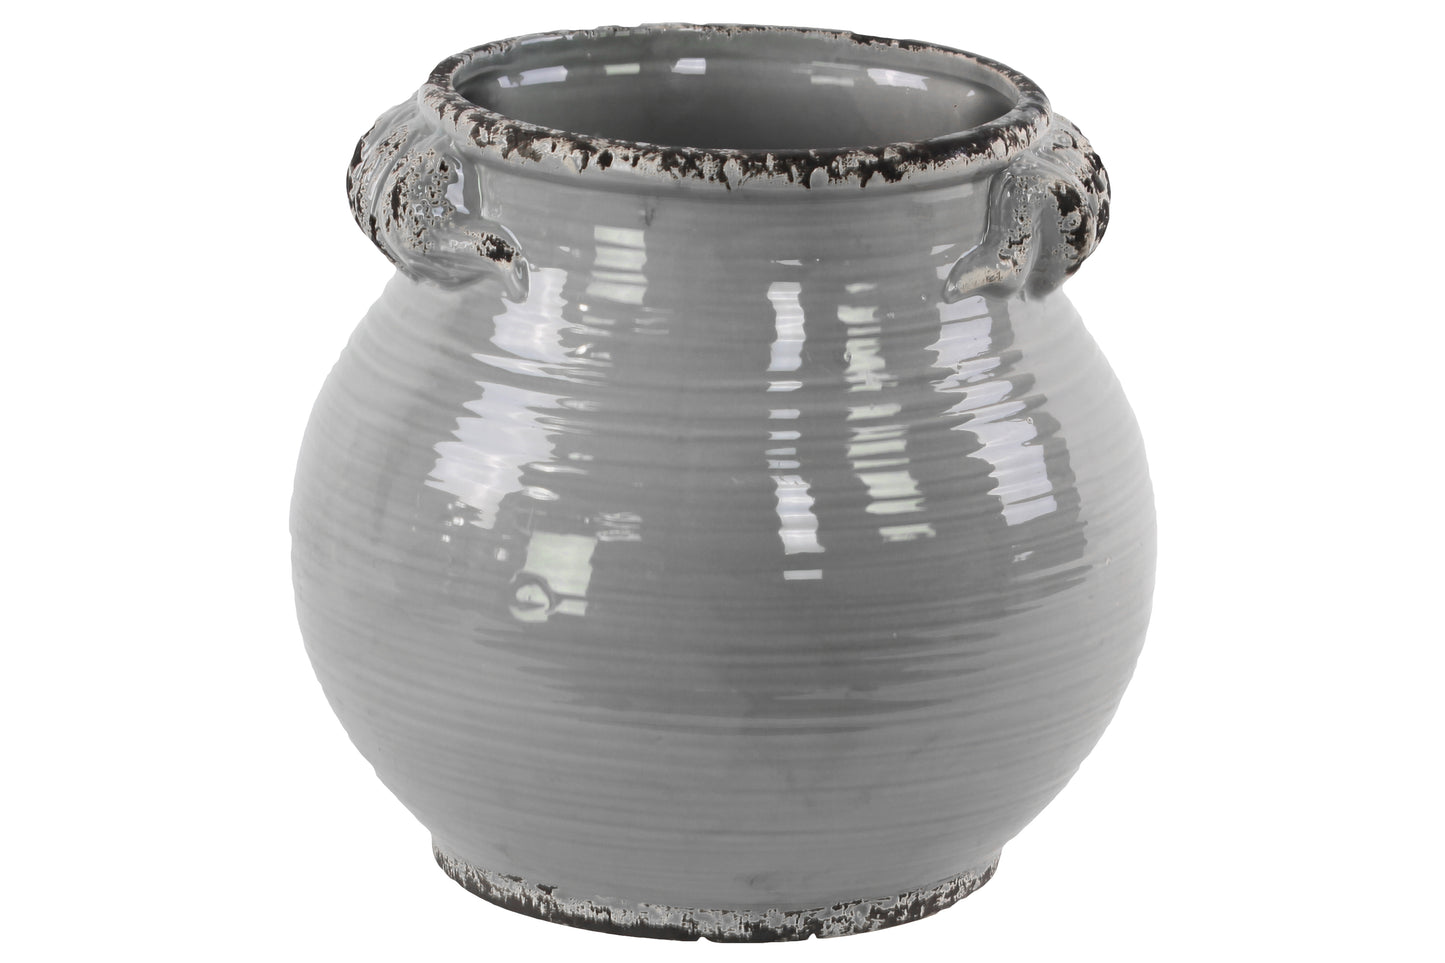 Ceramic Tall Round Bellied Tuscan Pot with Distressed Side Handles